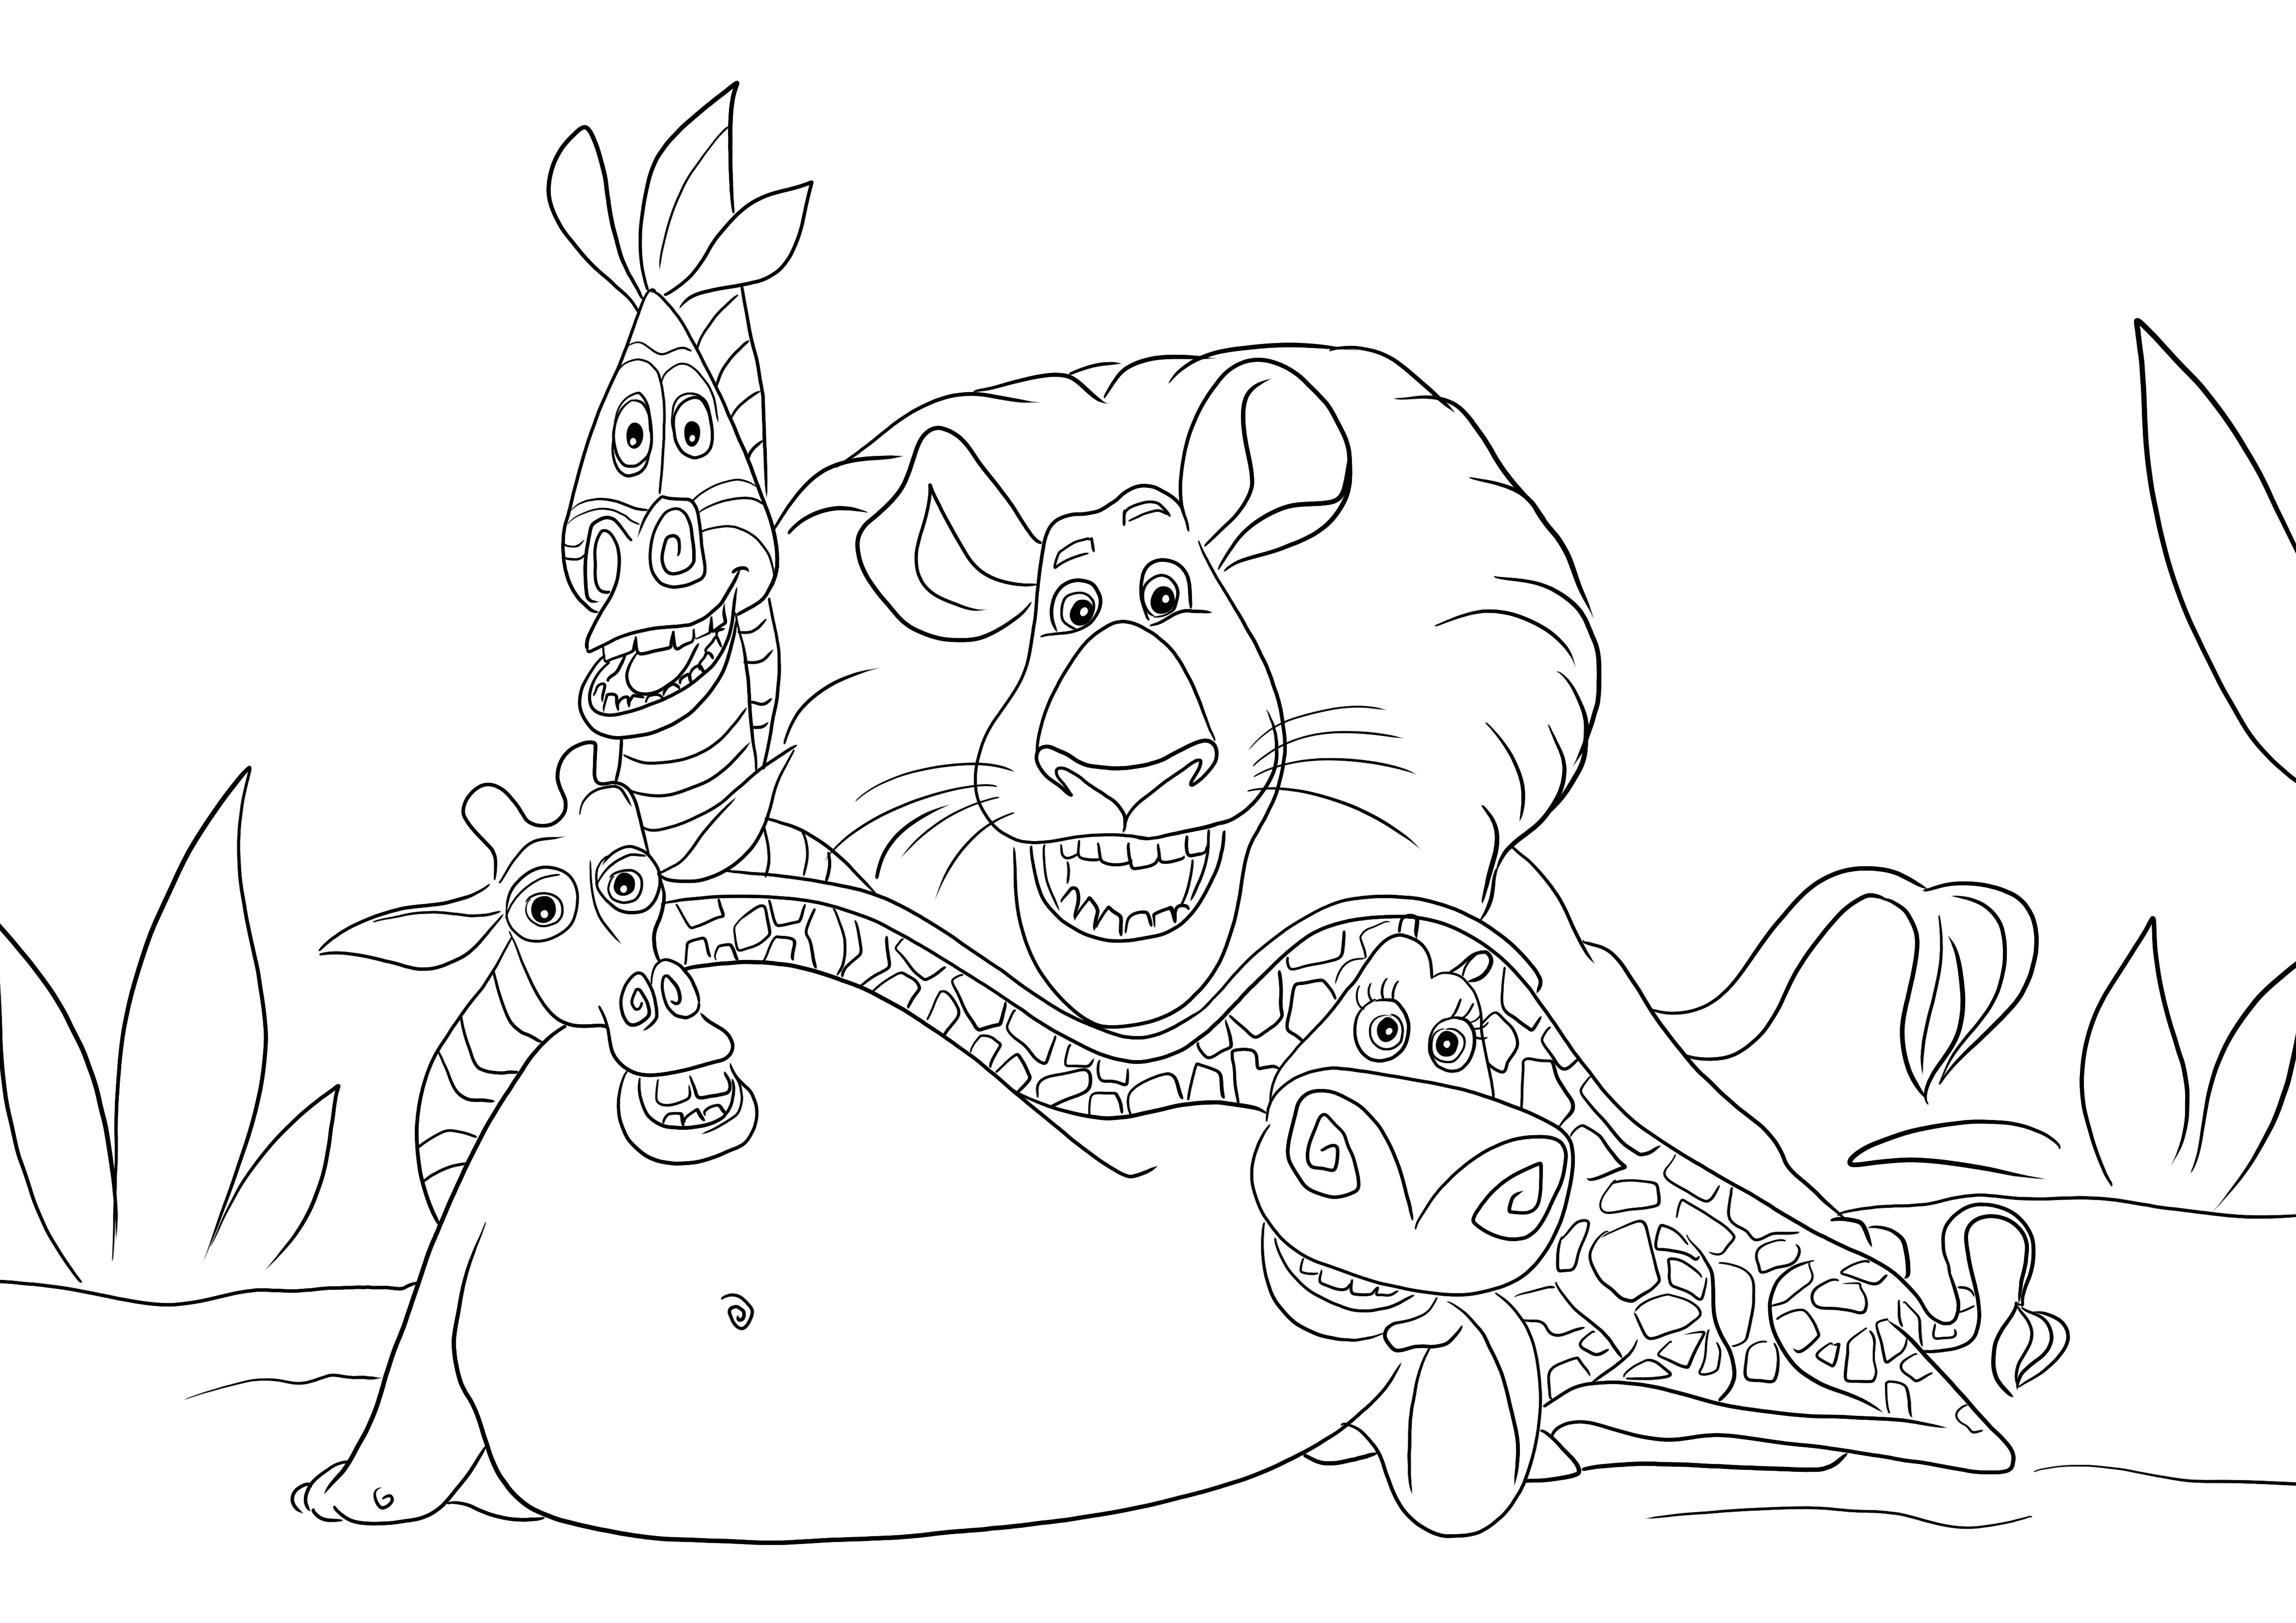 All favorite Madagascar friends in one coloring picture to download or print for free